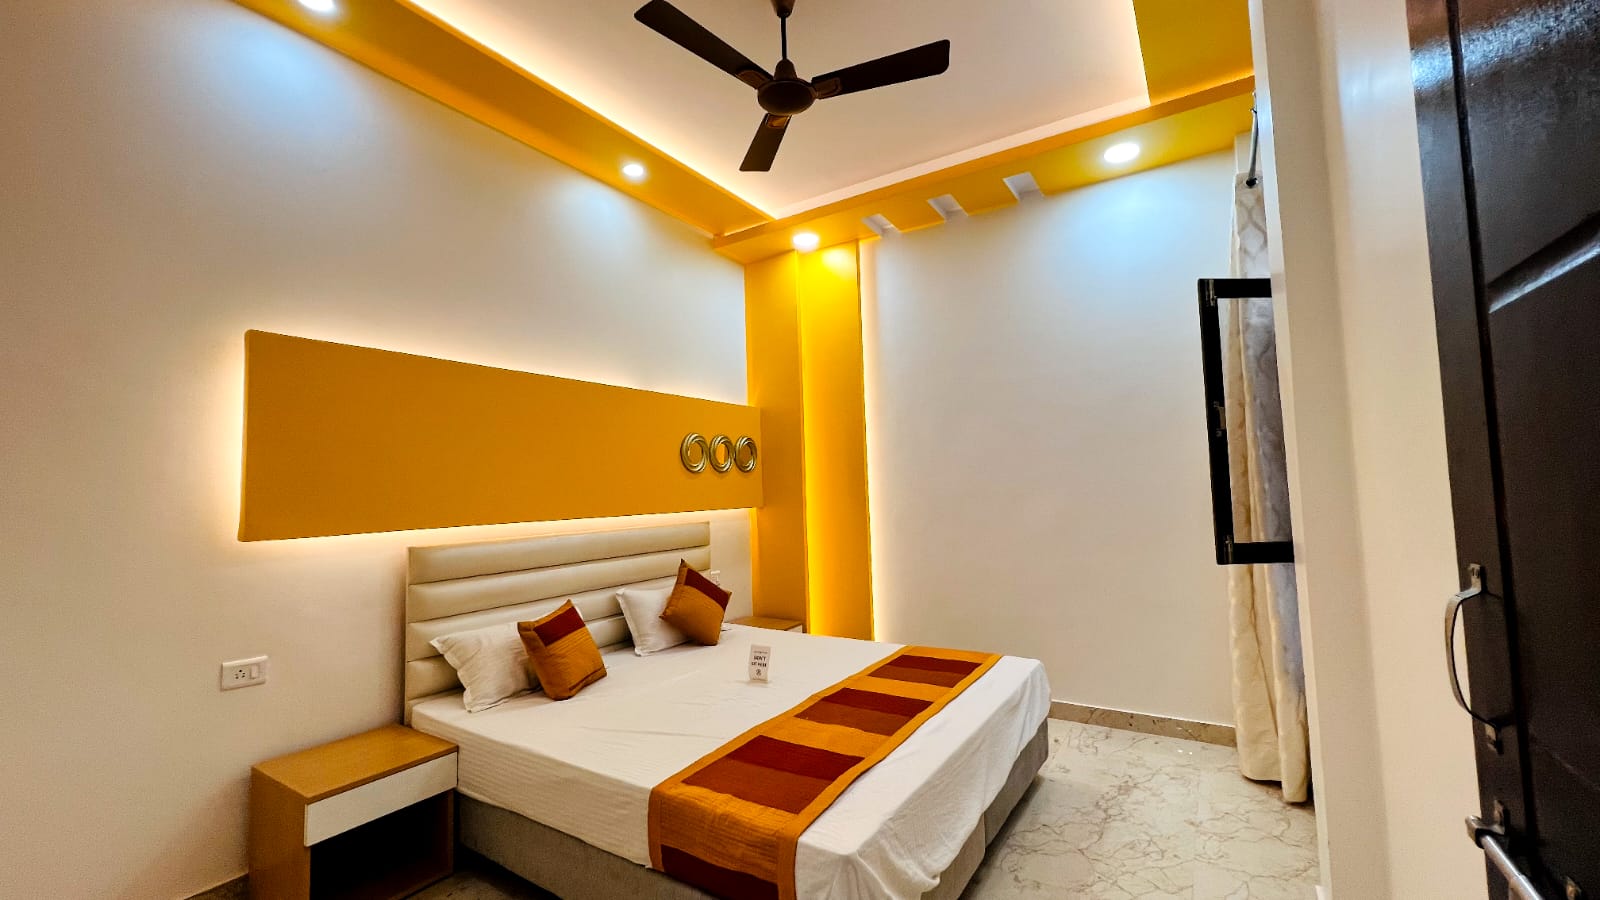 3 BHK Deluxe House For Sale in Indiranagar, Lucknow